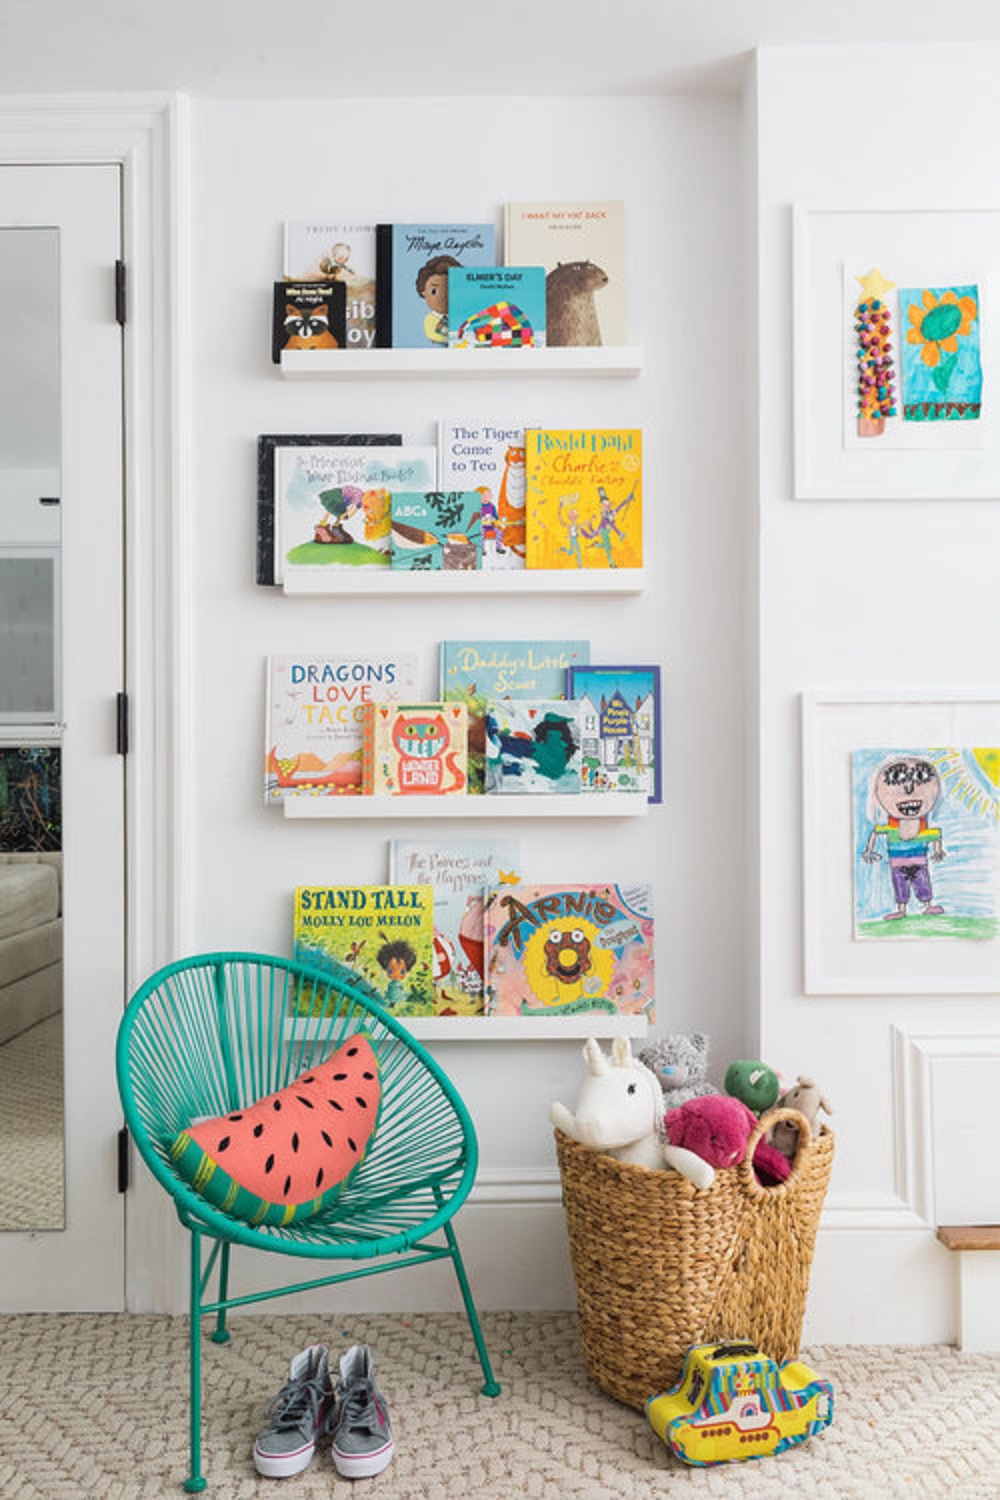 Joyelle_180314_008 Kids playroom ideas to arrange and decorate the coolest kids space